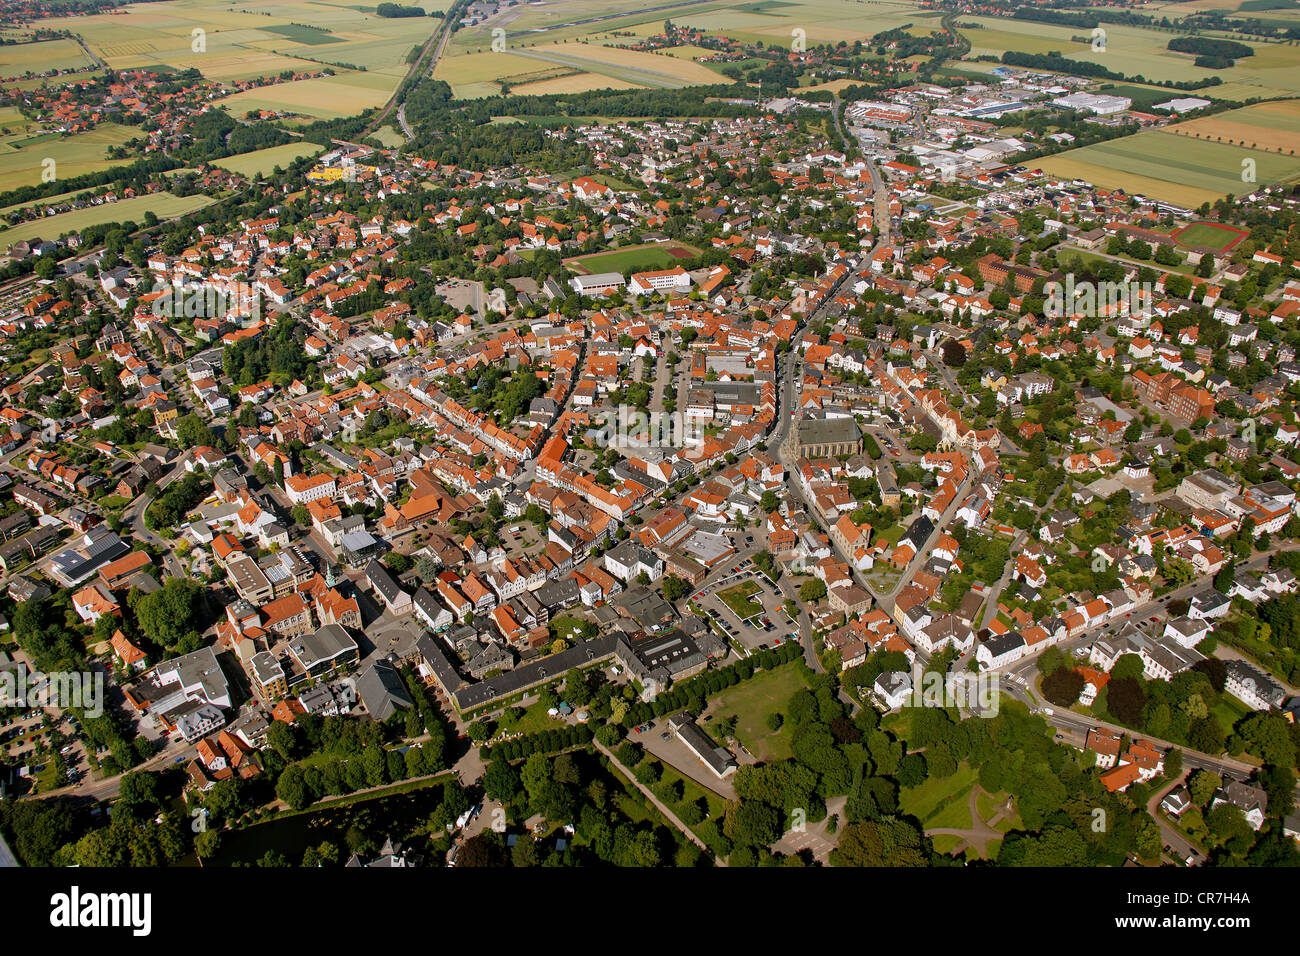 Aerial view, Bueckeburg, district of Schaumburg, Lower Saxony, Germany, Europe Stock Photo